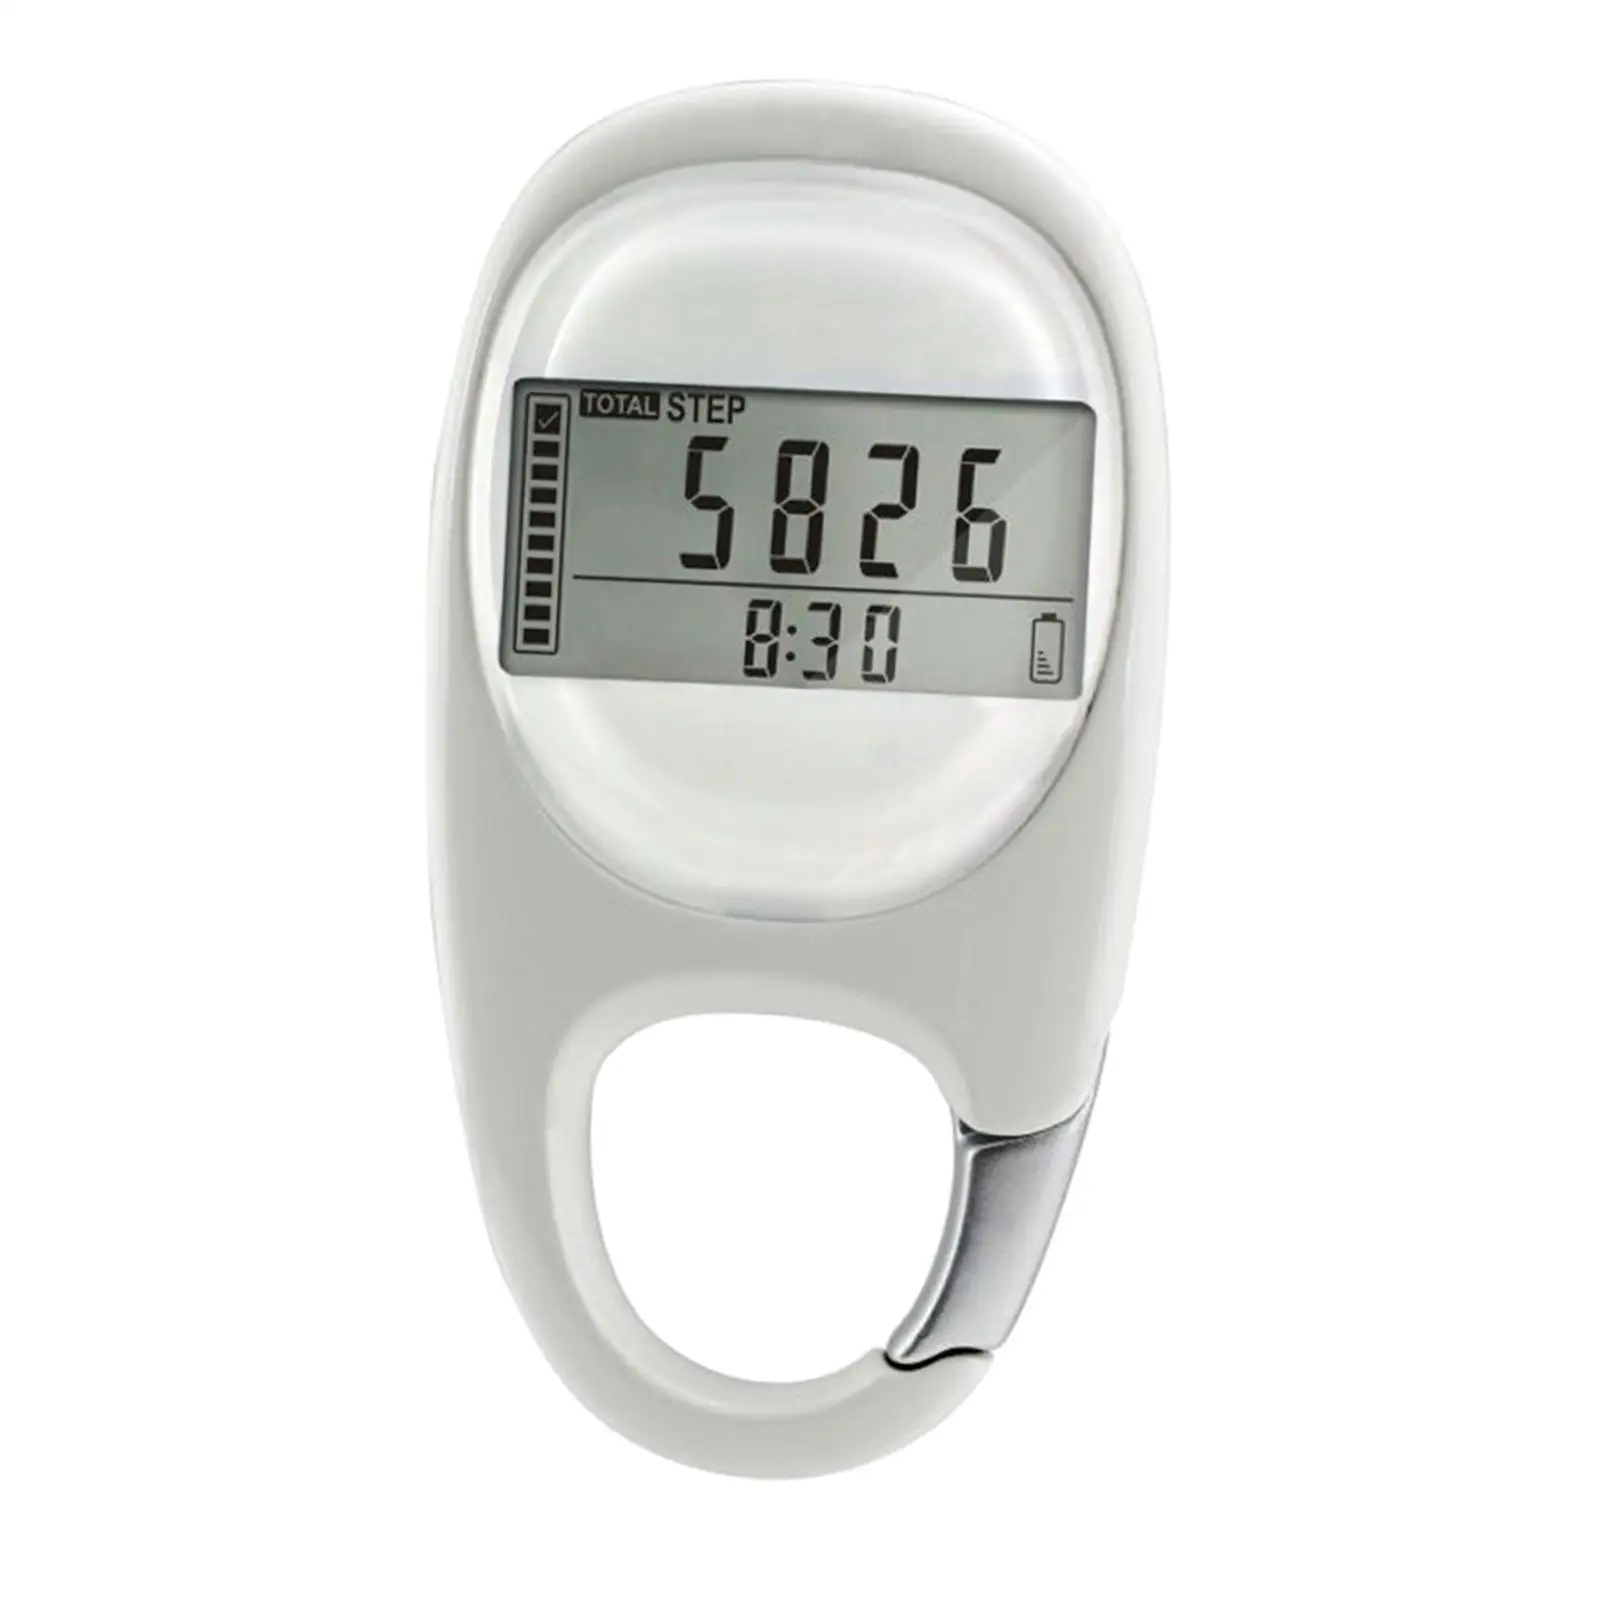 Portable Walking 3D Sensor Pedometer with Clip Digital Display Fitness Technology Step Calorie Counter for Running Jogging